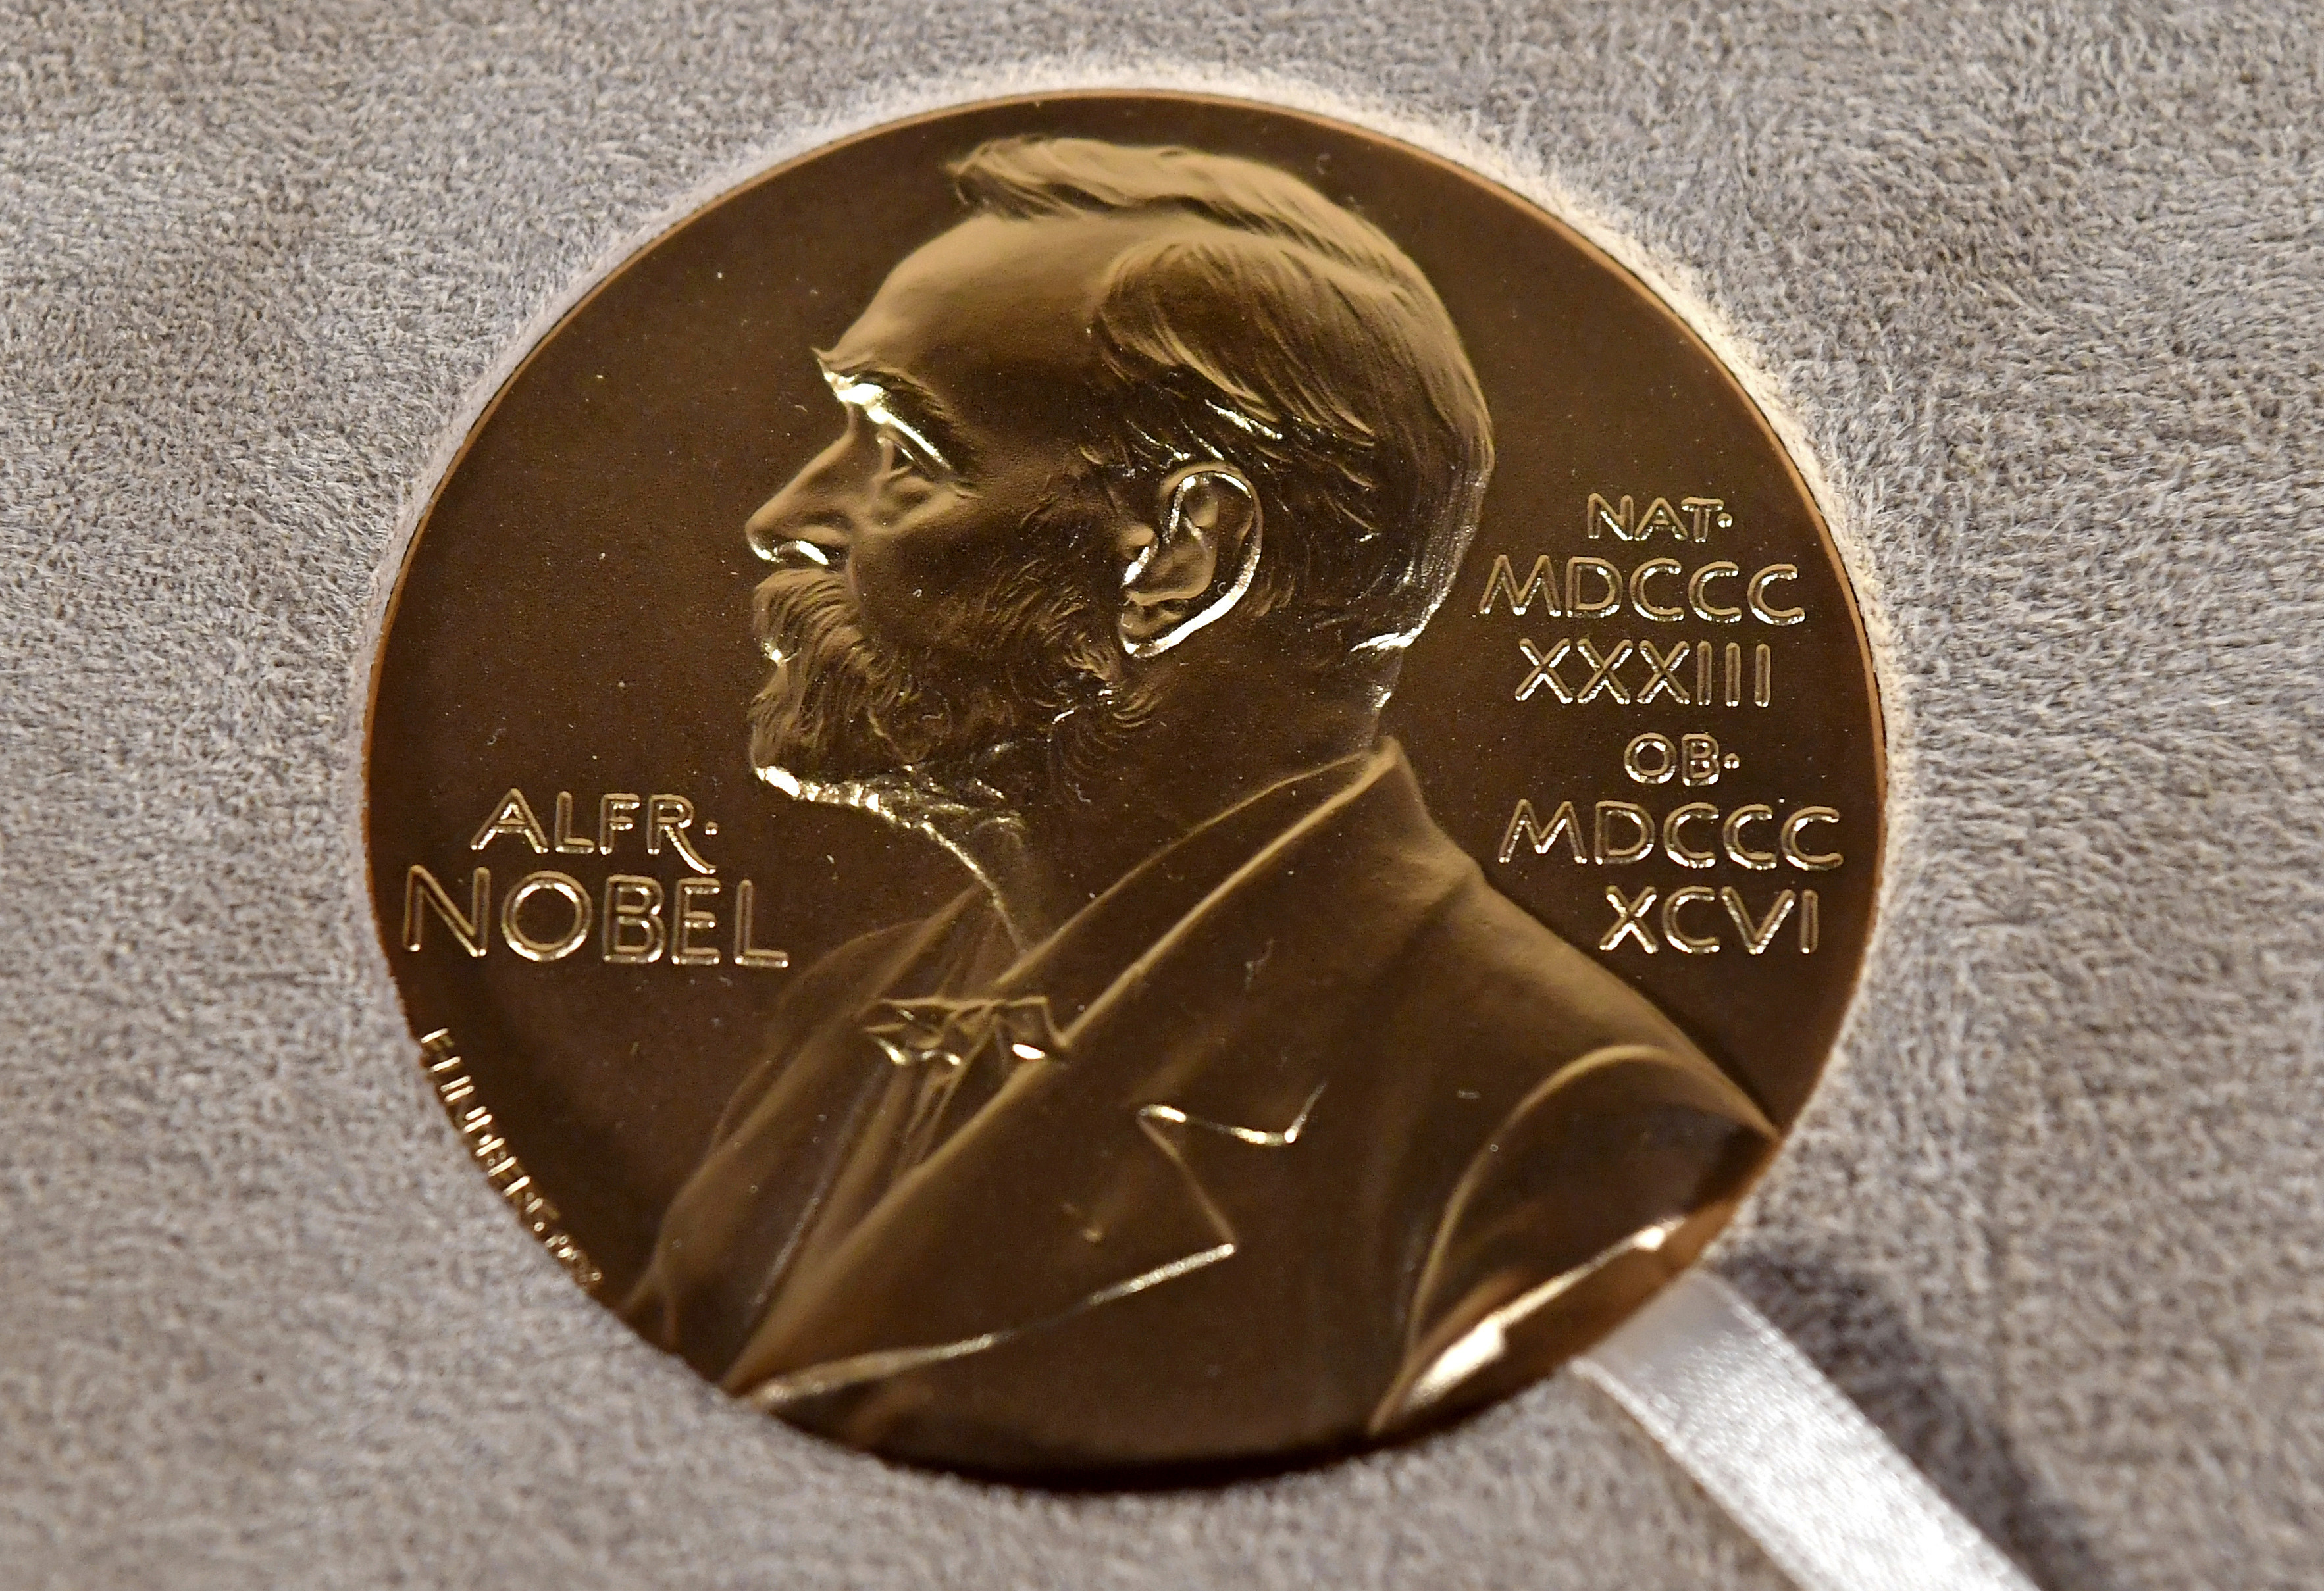 A Nobel medal from the foundation that administers the prestigious Nobel awards. File: AP